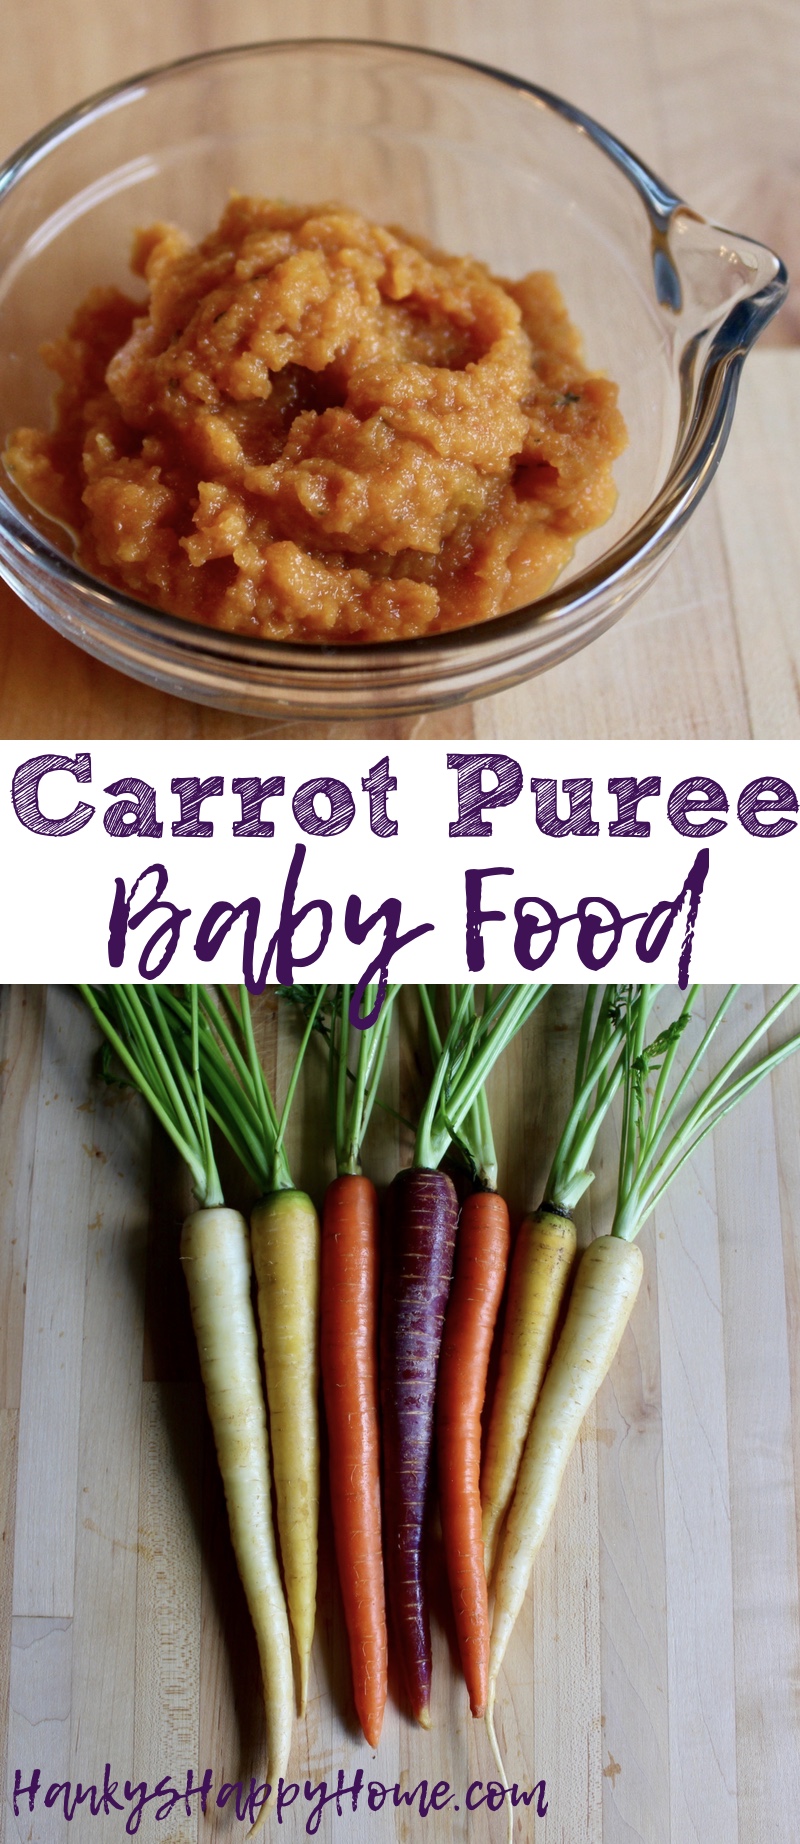 Carrot puree is a staple when introducing solids as it's easy to digest, sweet, and a great source beta carotenes.